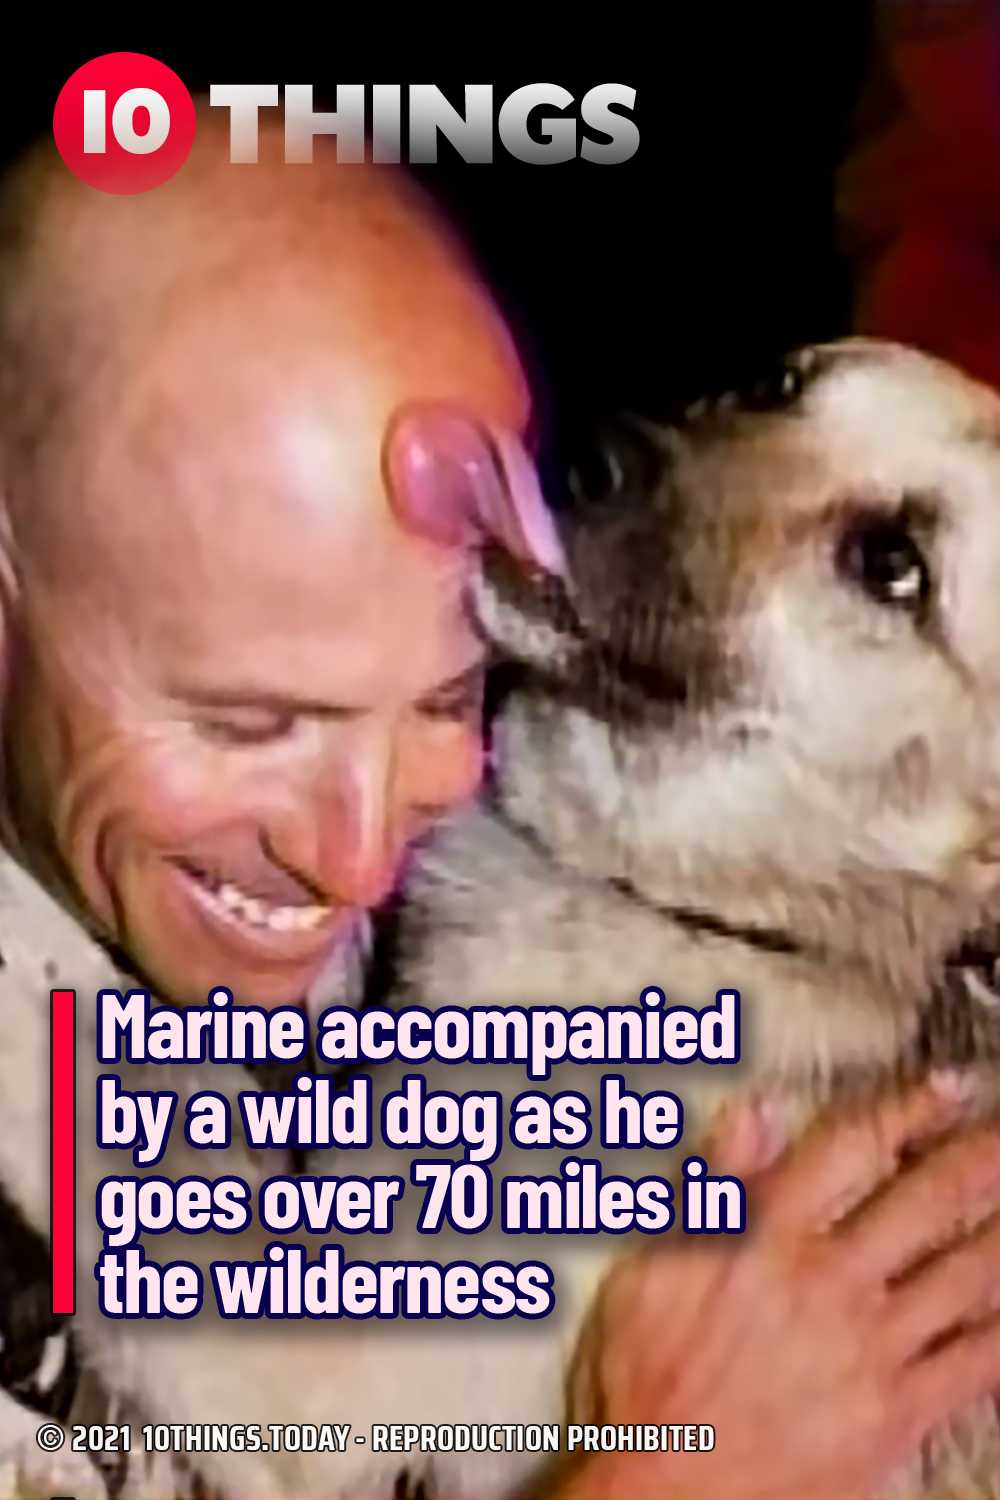 Marine accompanied by a wild dog as he goes over 70 miles in the wilderness